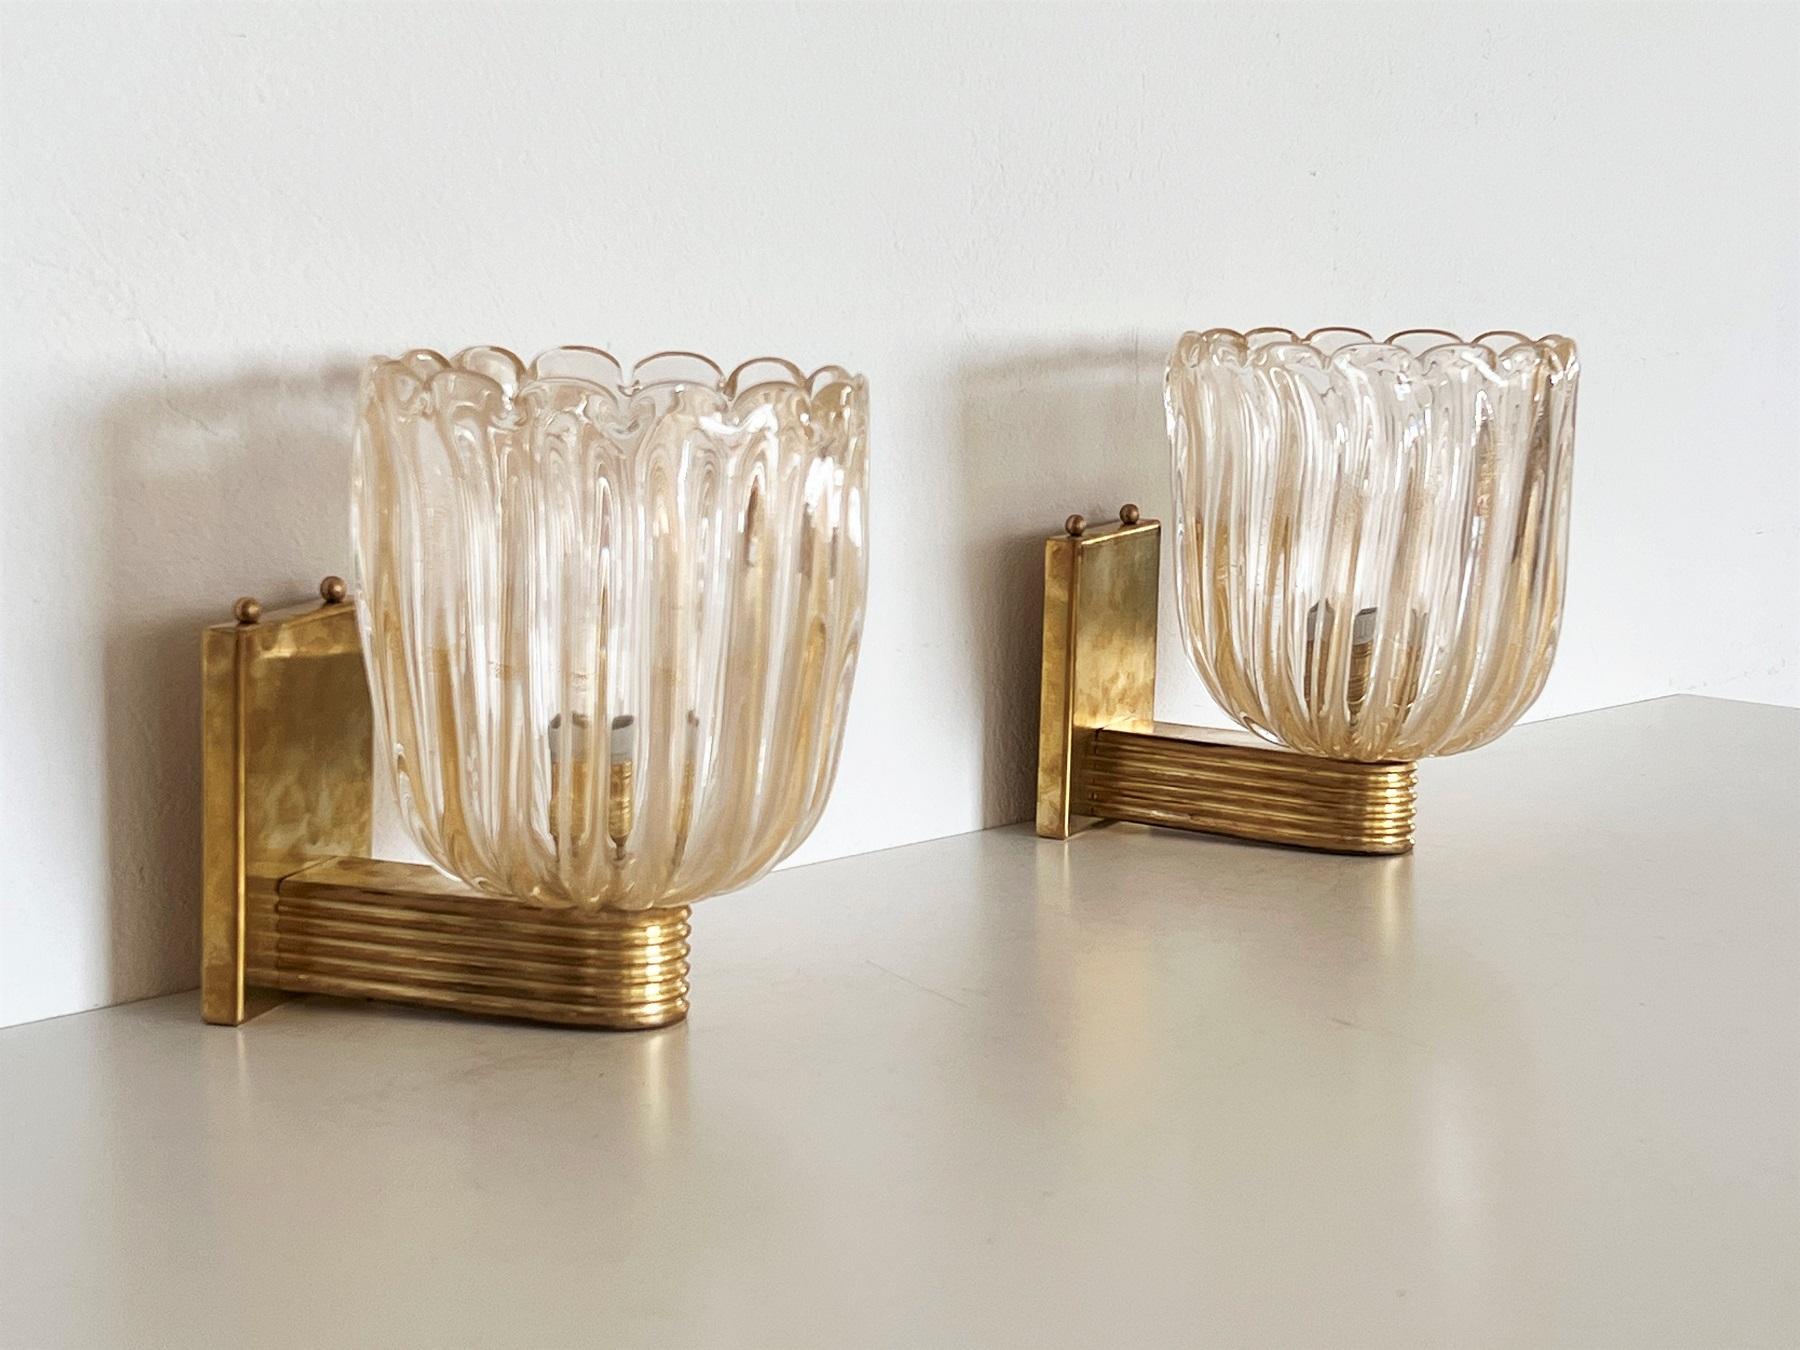 Hand-Crafted Italian Brass and Murano Glass Wall Lights or Sconces in Art Deco Style, 1990s